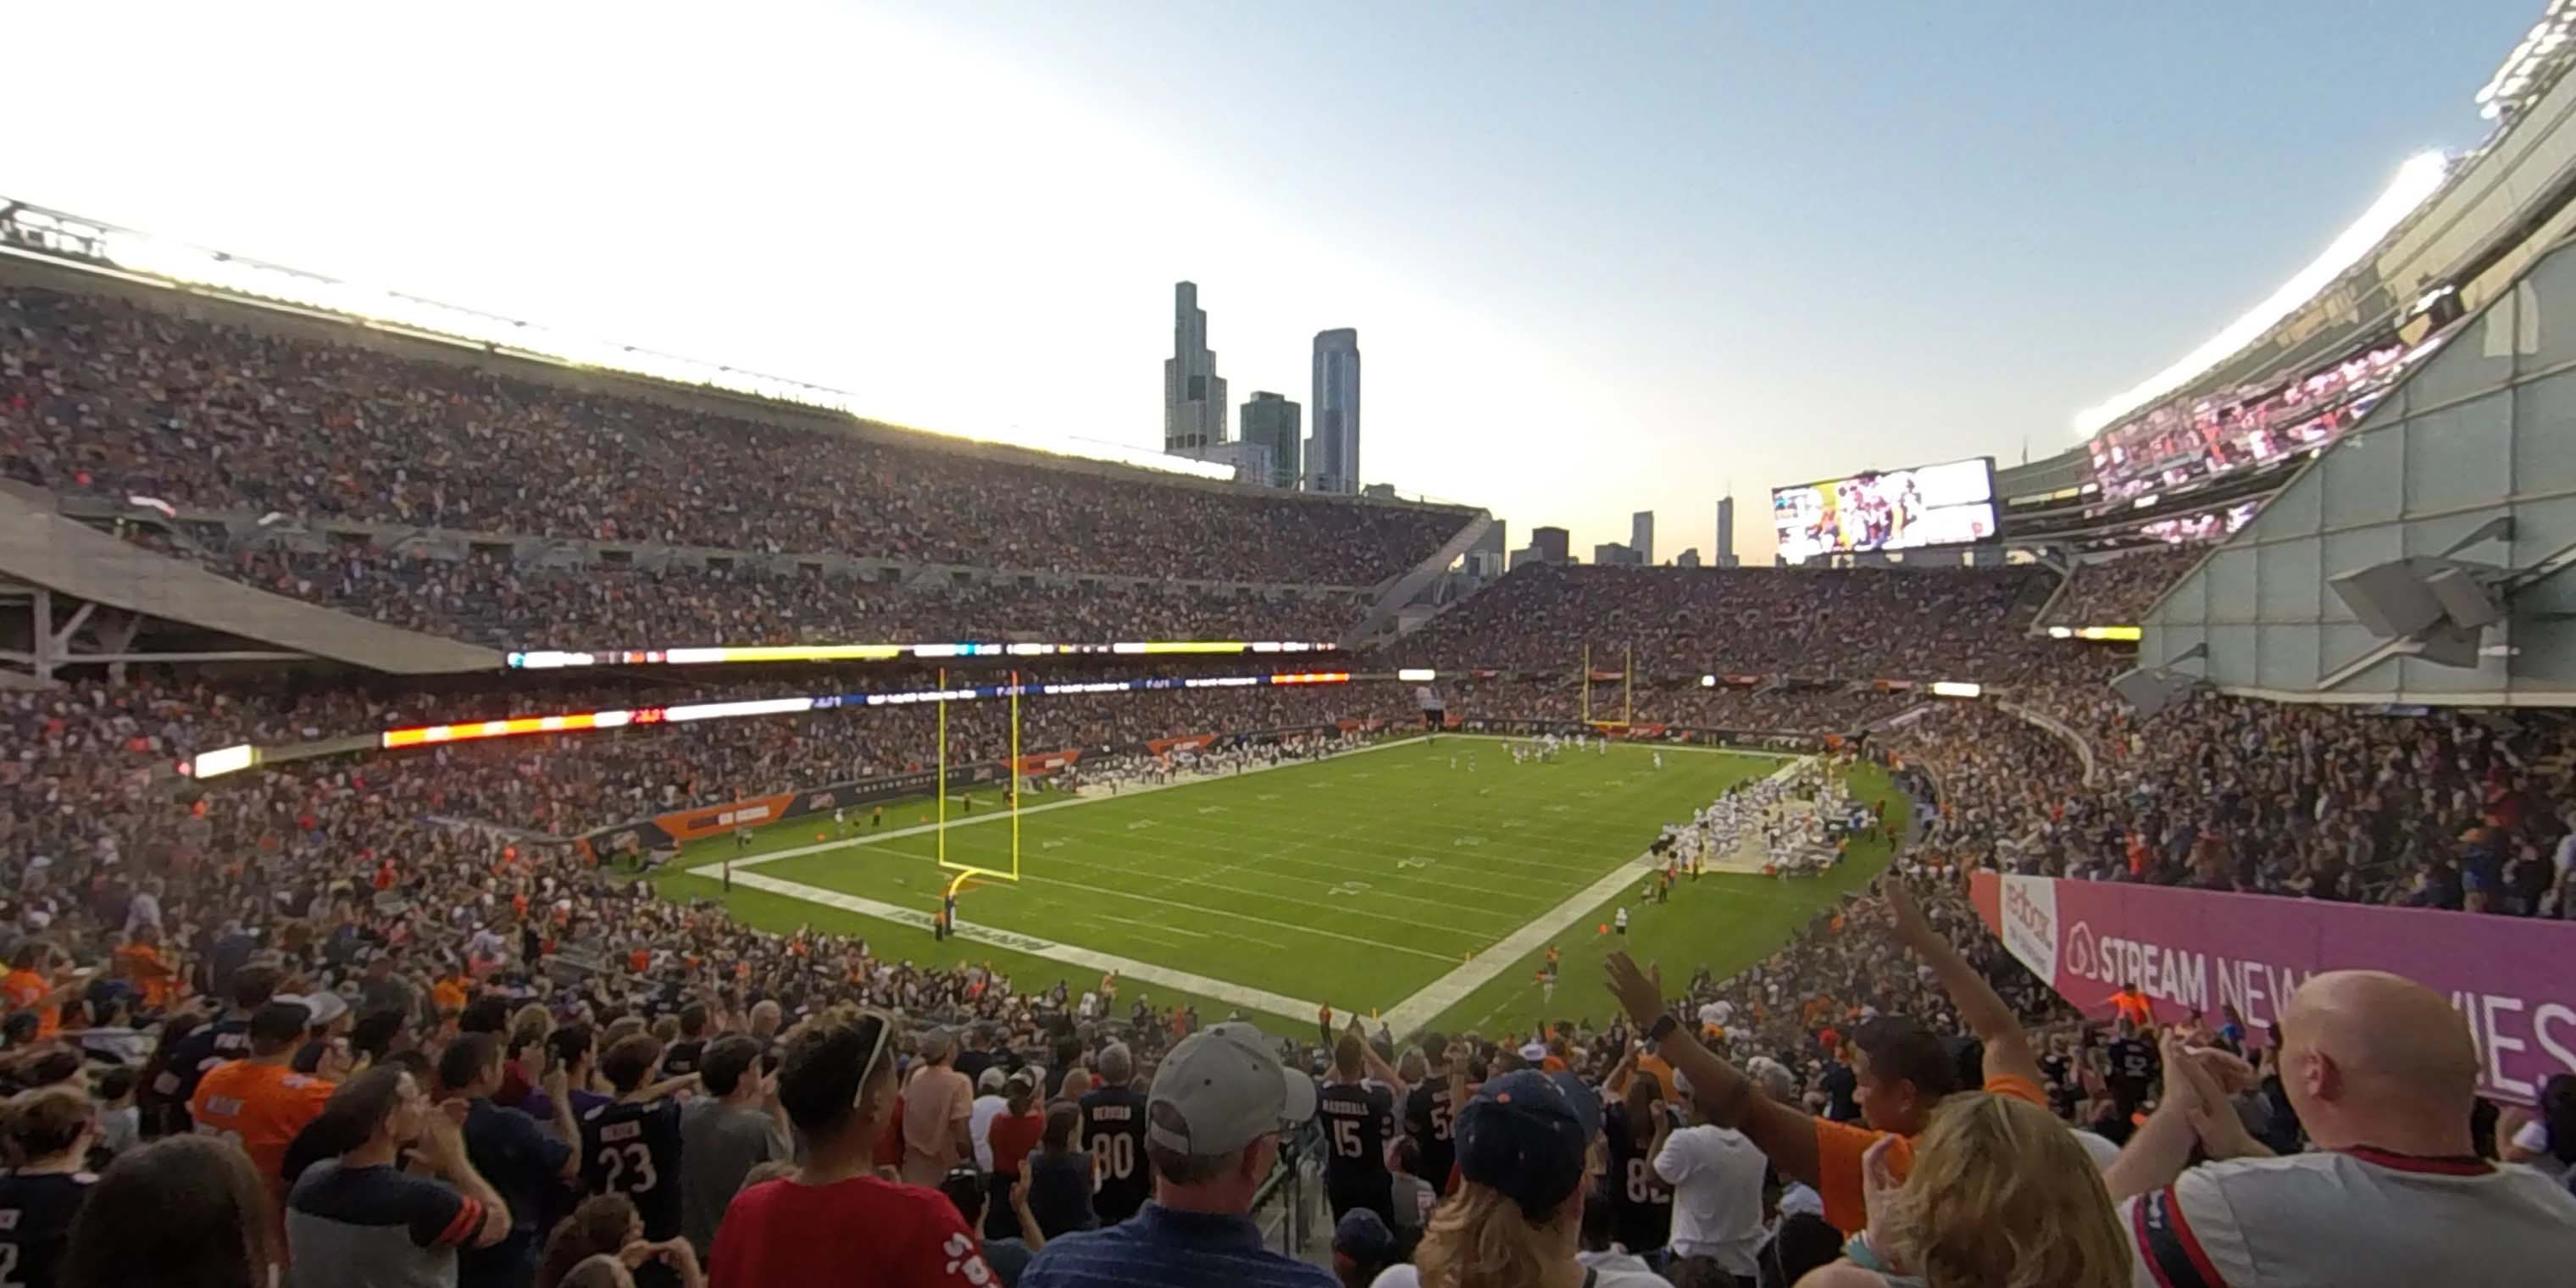 section 218 panoramic seat view  for football - soldier field